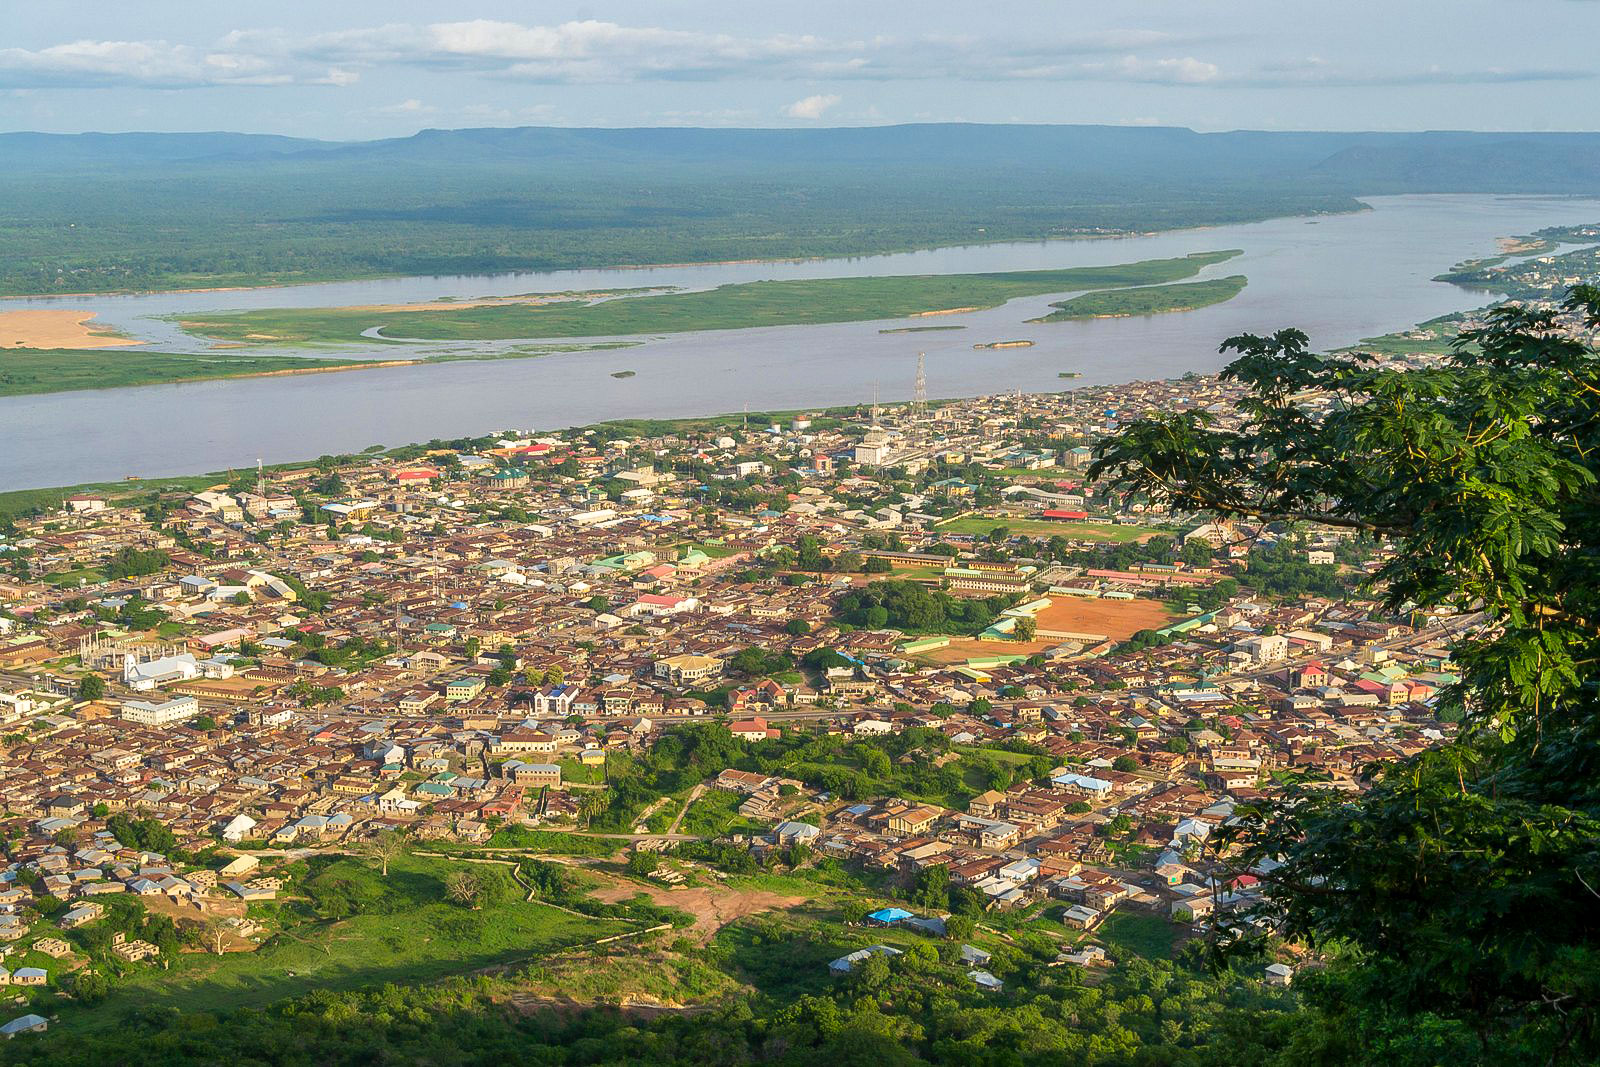 At the confluence of the Niger and Benue Rivers near Lokoja, as seen from Mt. Patti, Nigeria